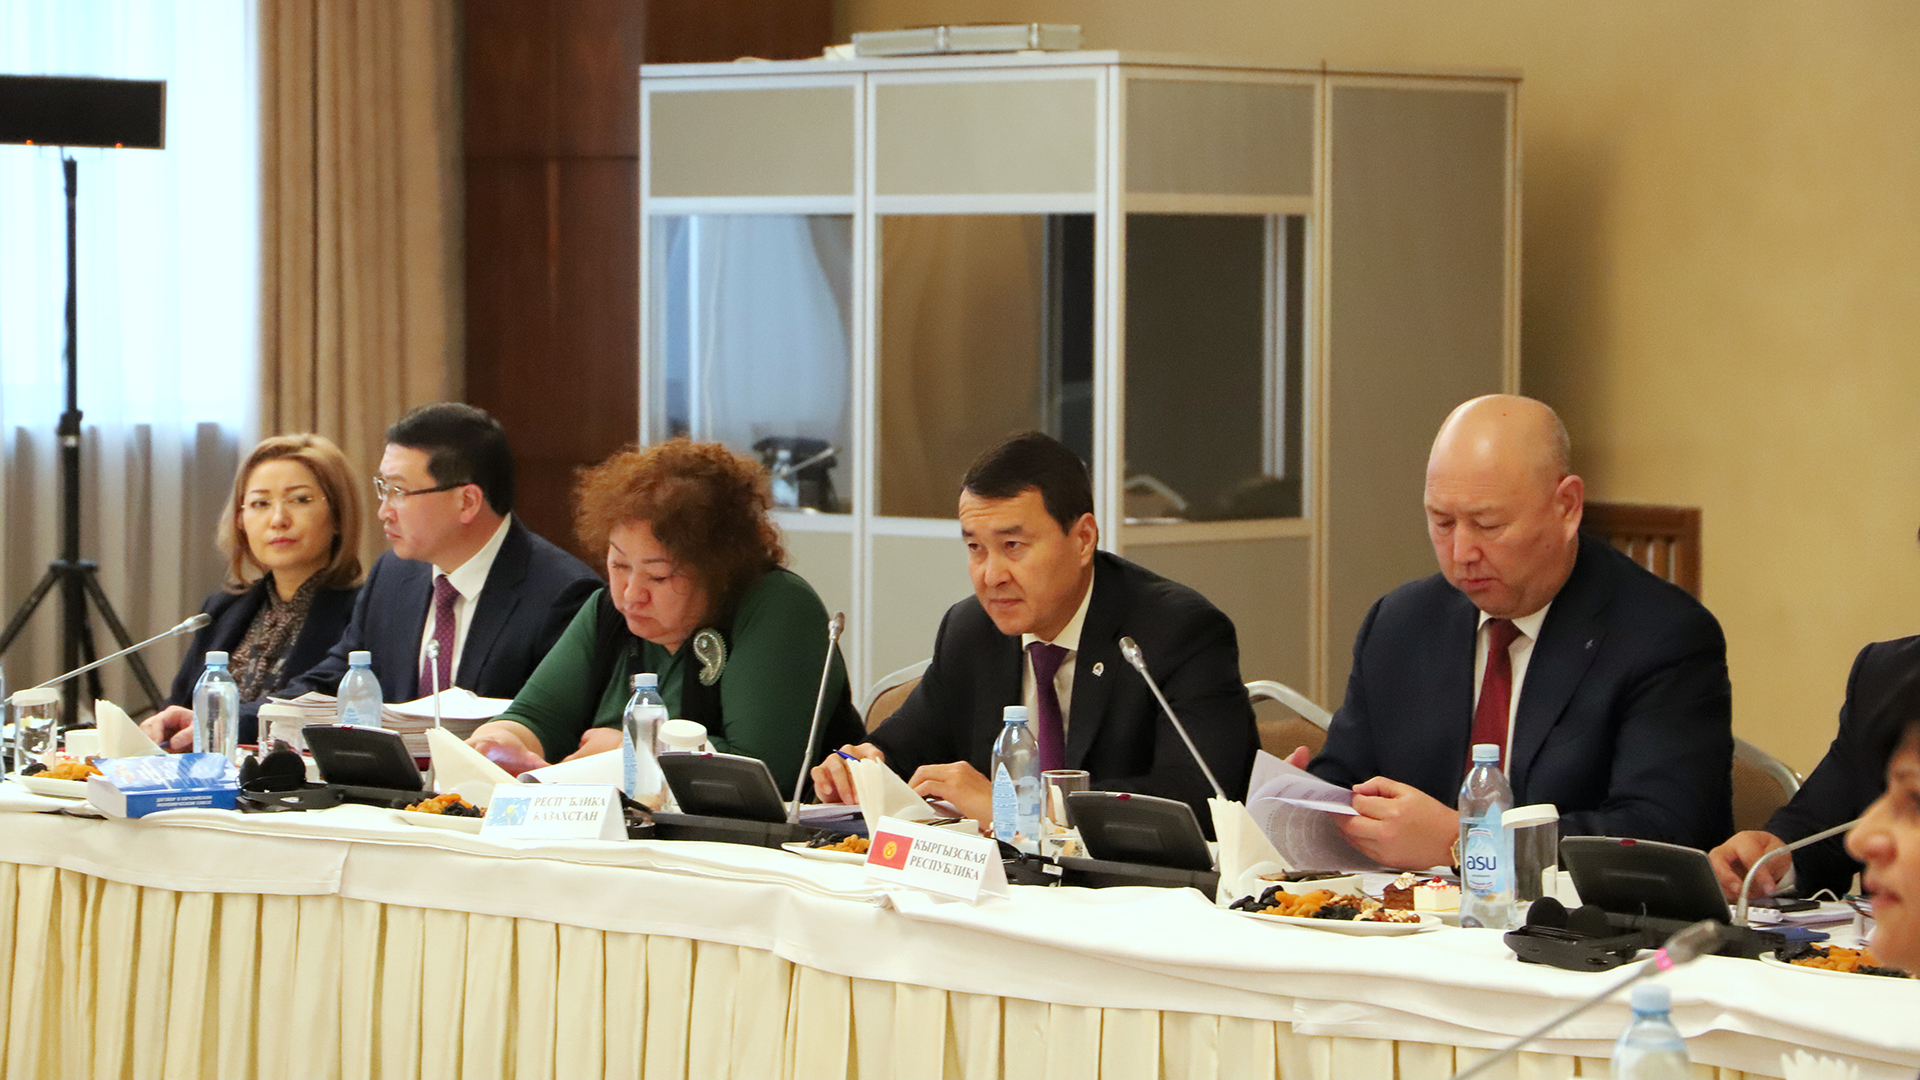 Issues in further development of EAEU discussed in Almaty